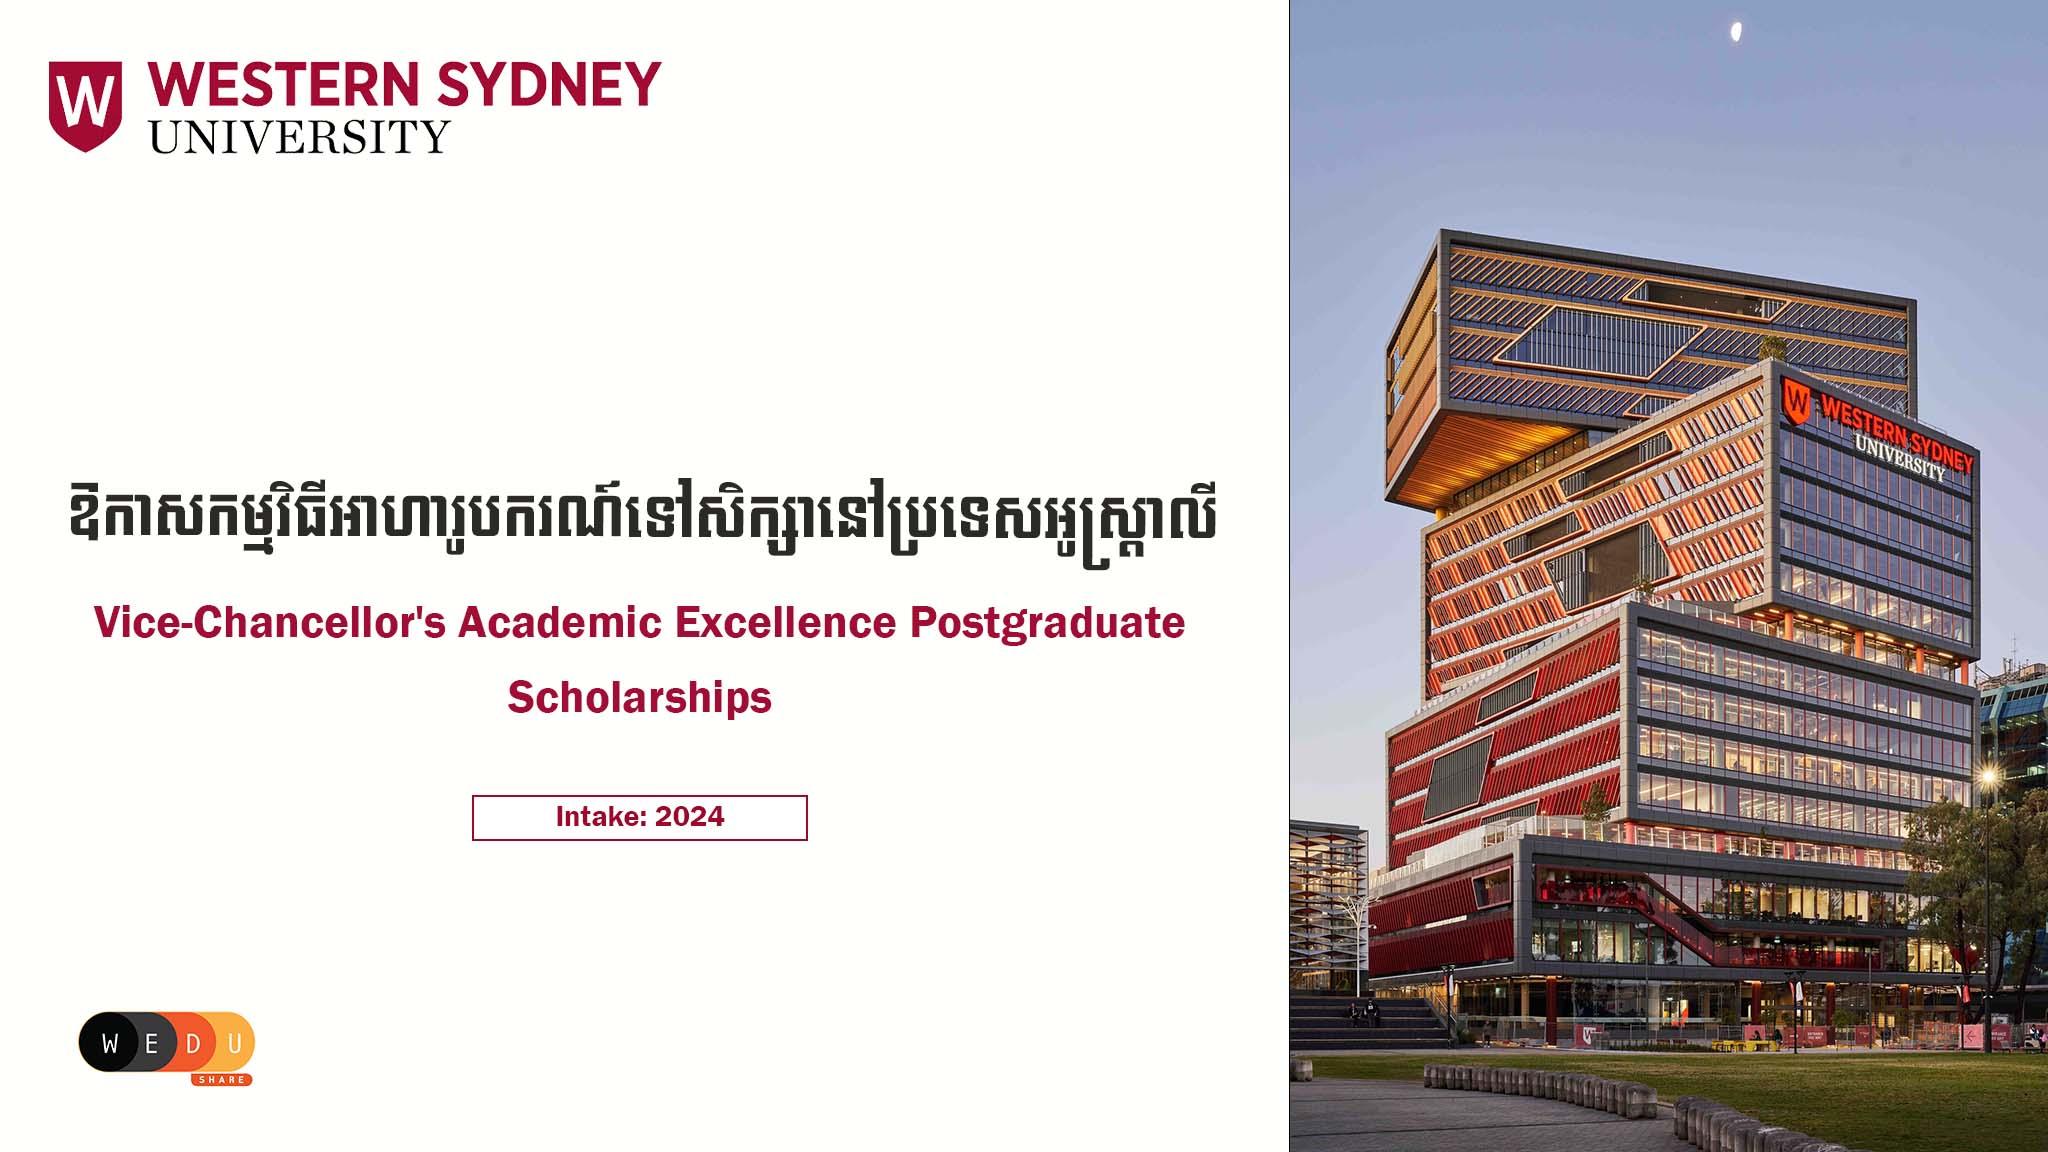 Vice-Chancellor's Academic Excellence Postgraduate Scholarships